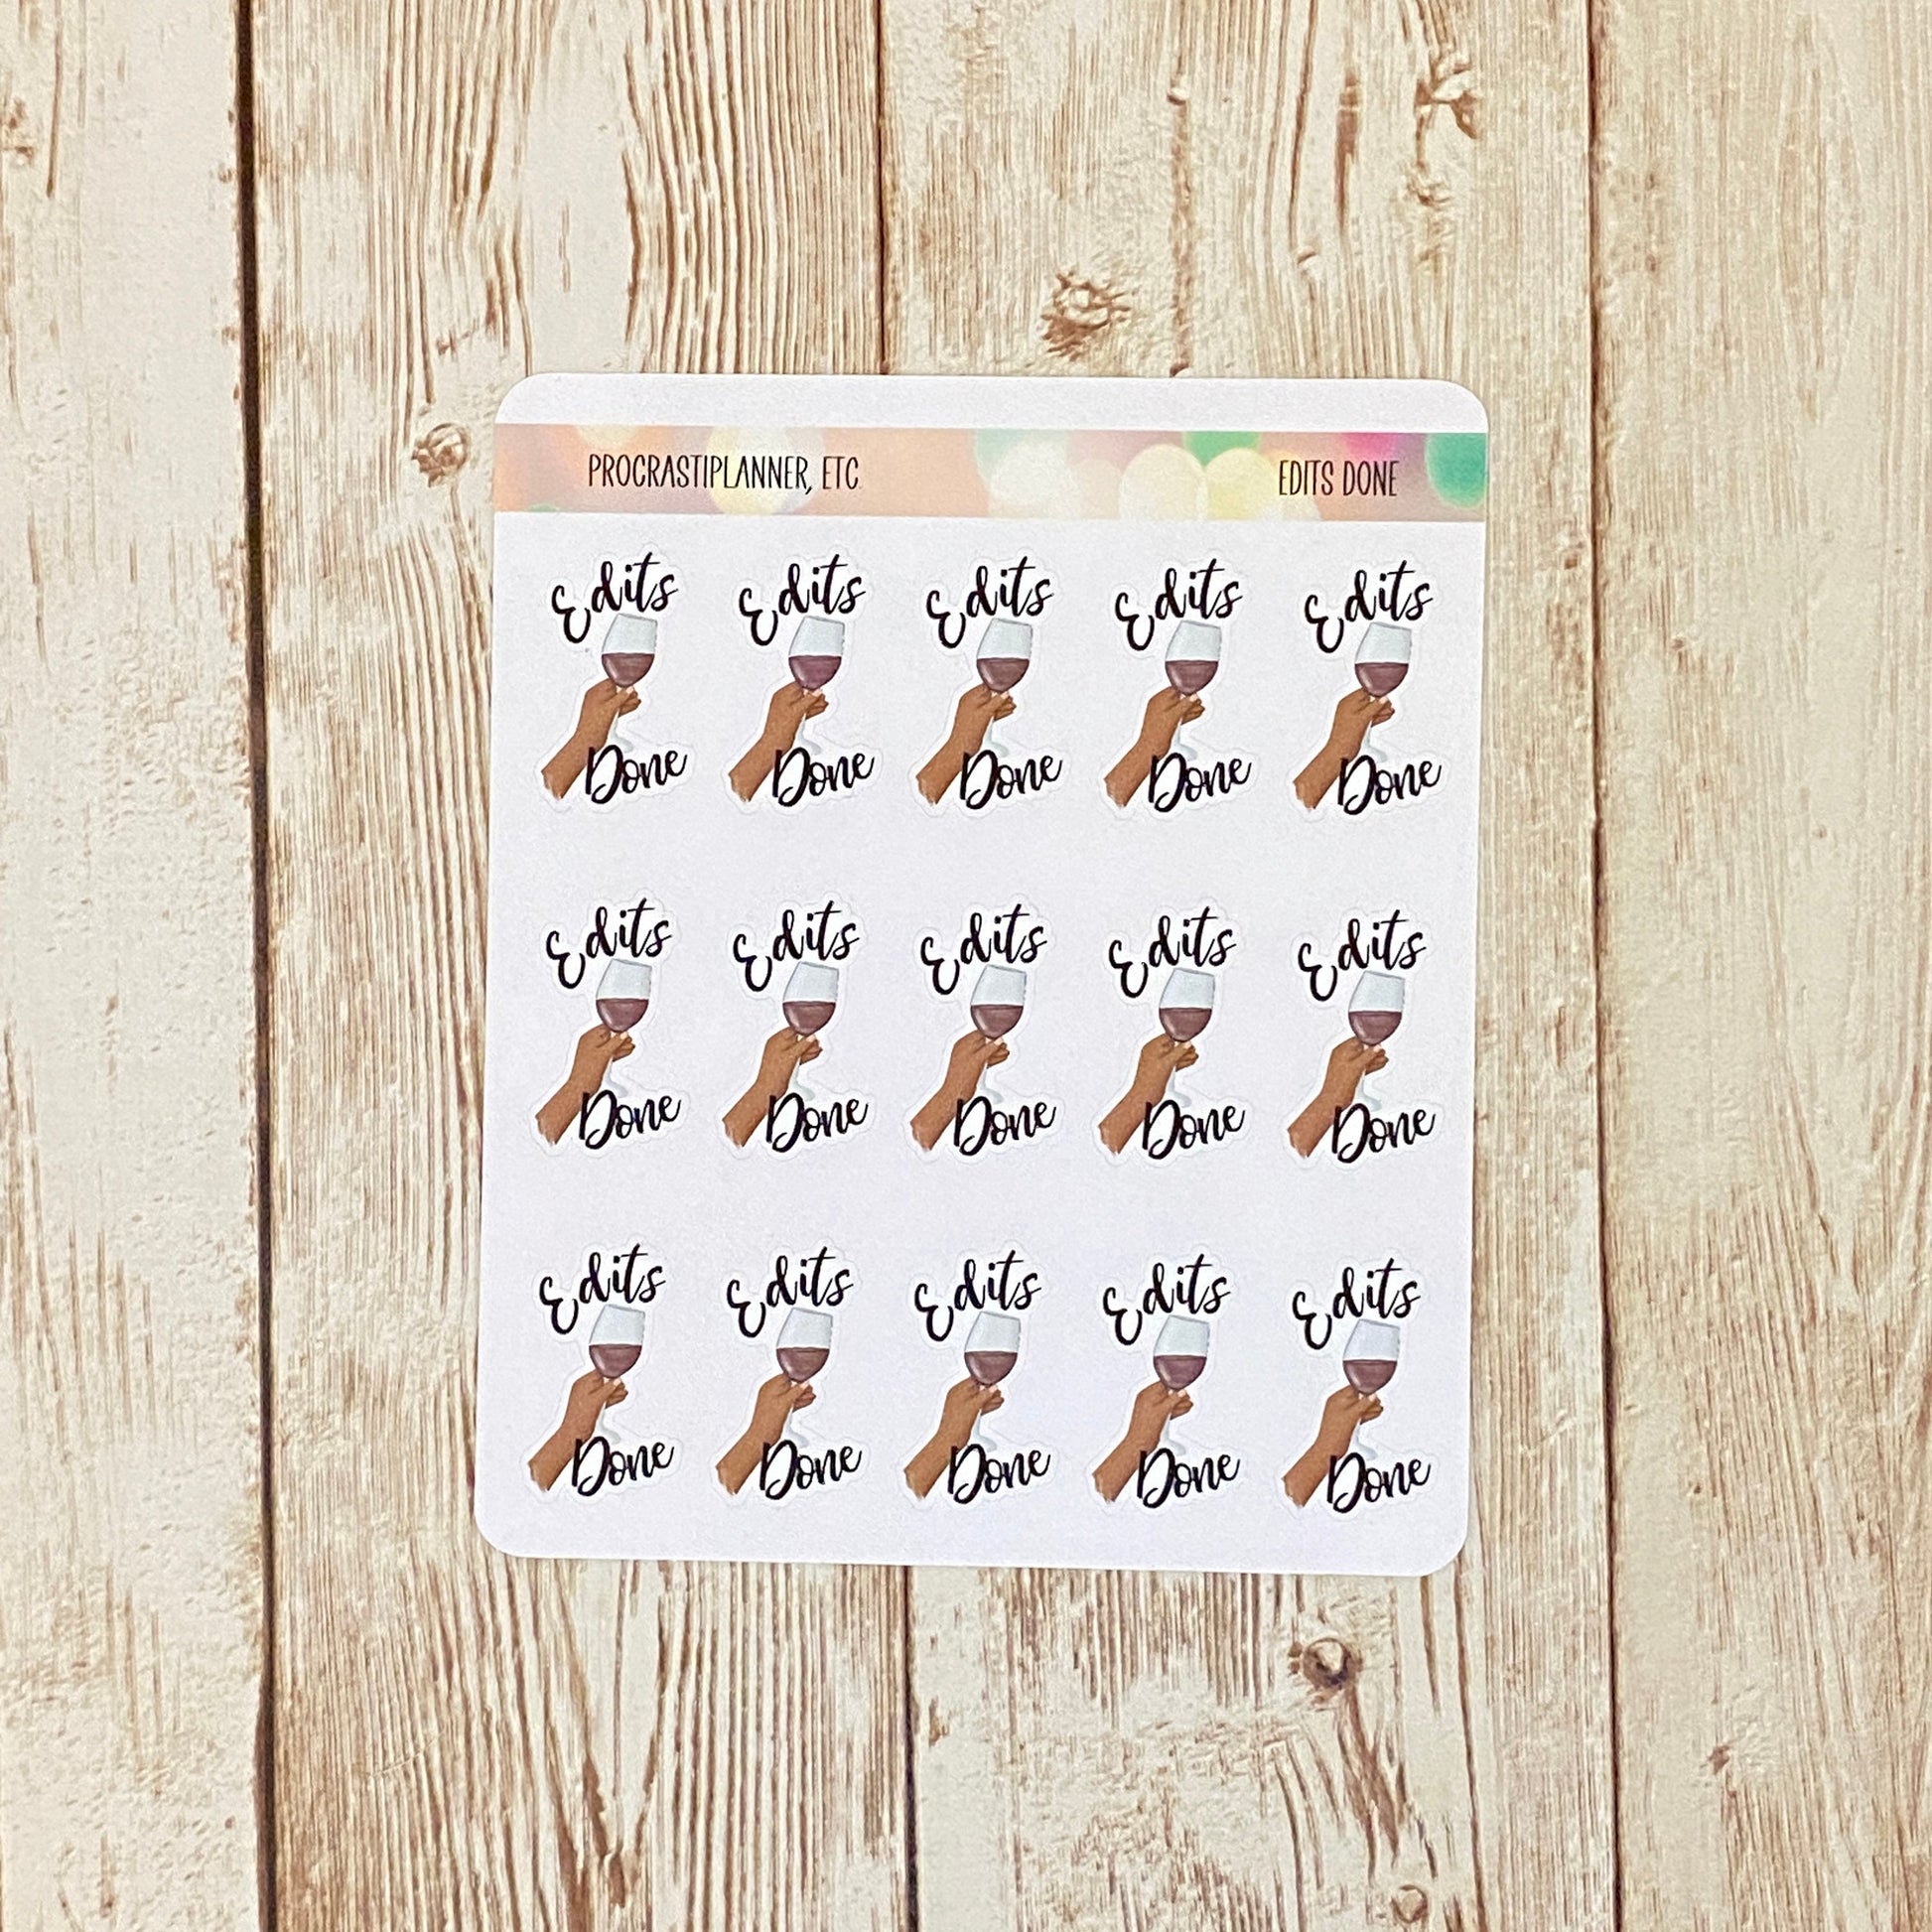 Edits Done! Celebration Planner Stickers for Authors